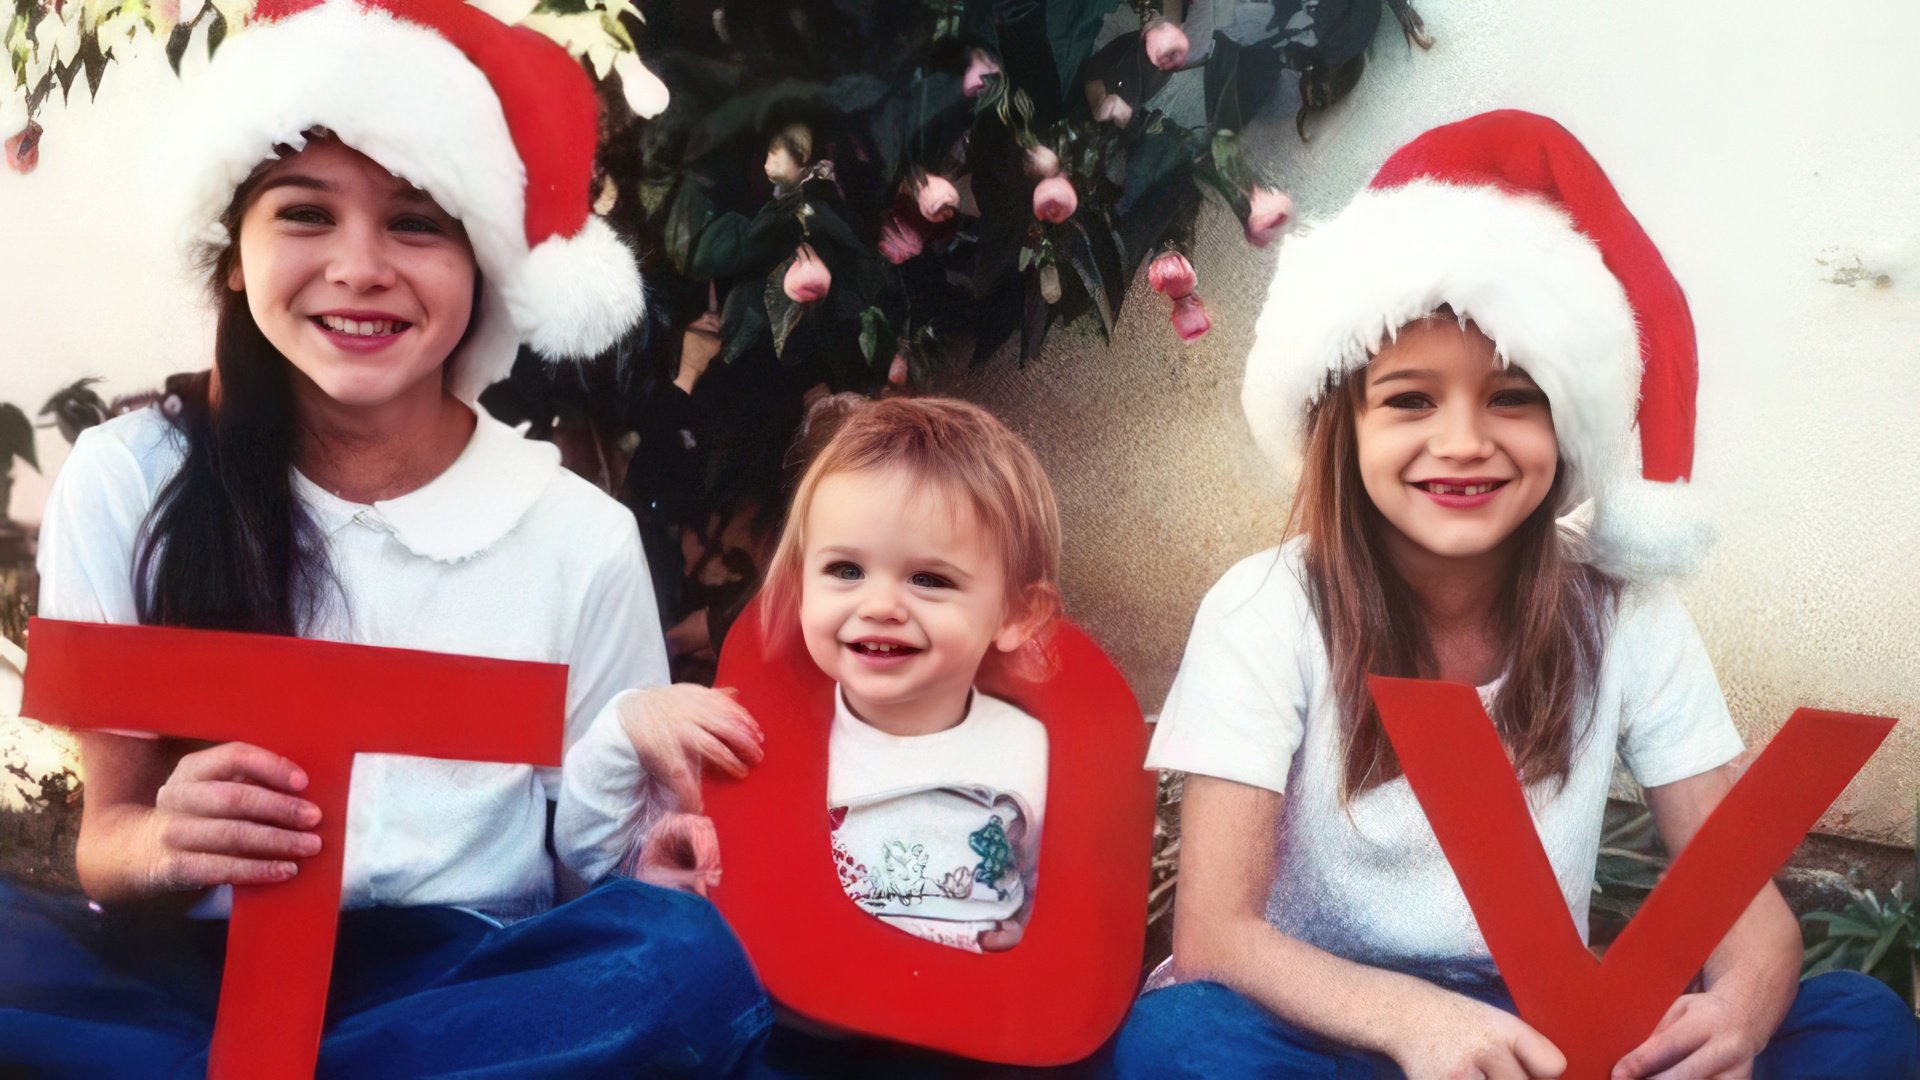 Young Joey King with sisters (in the middle)